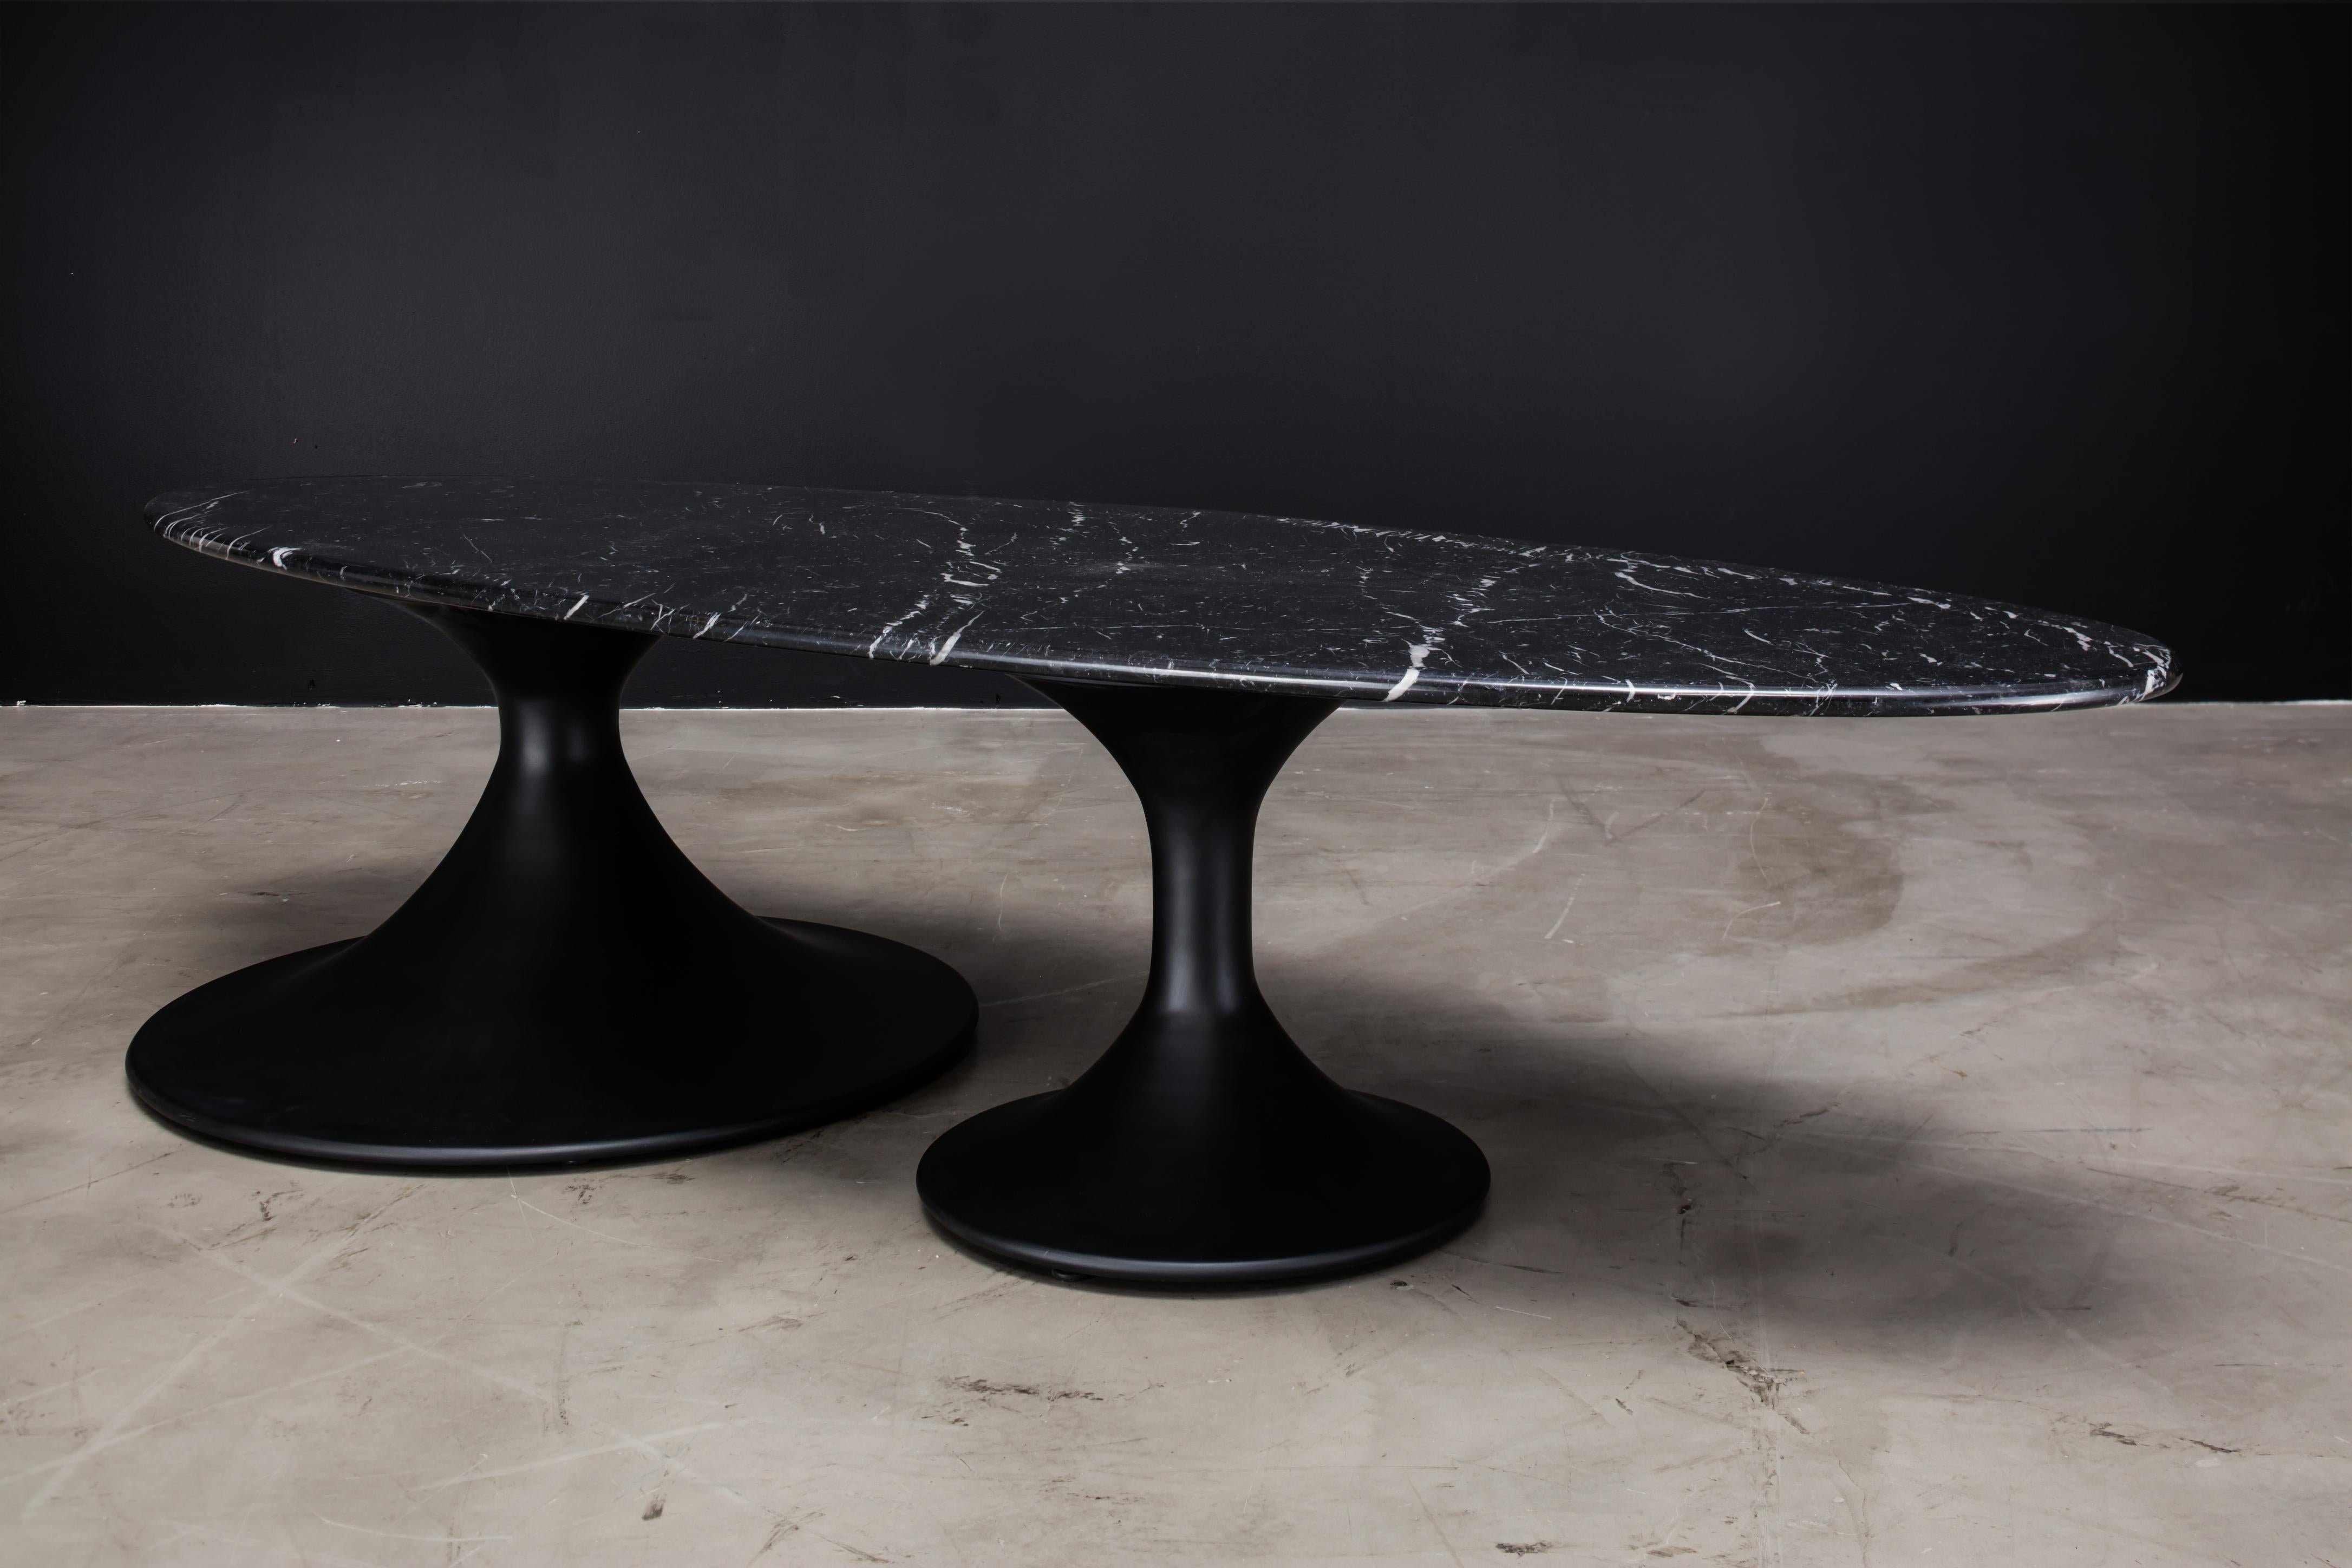 DRIP COFFEE TABLE - Powder-Coated Black + Nero Marquina Marble, Showroom Sample

The Drip Coffee Table is a modern cocktail table made of powder-coated metal with a Nero Marquina marble top. The asymmetrical and offset bases set this beautiful piece